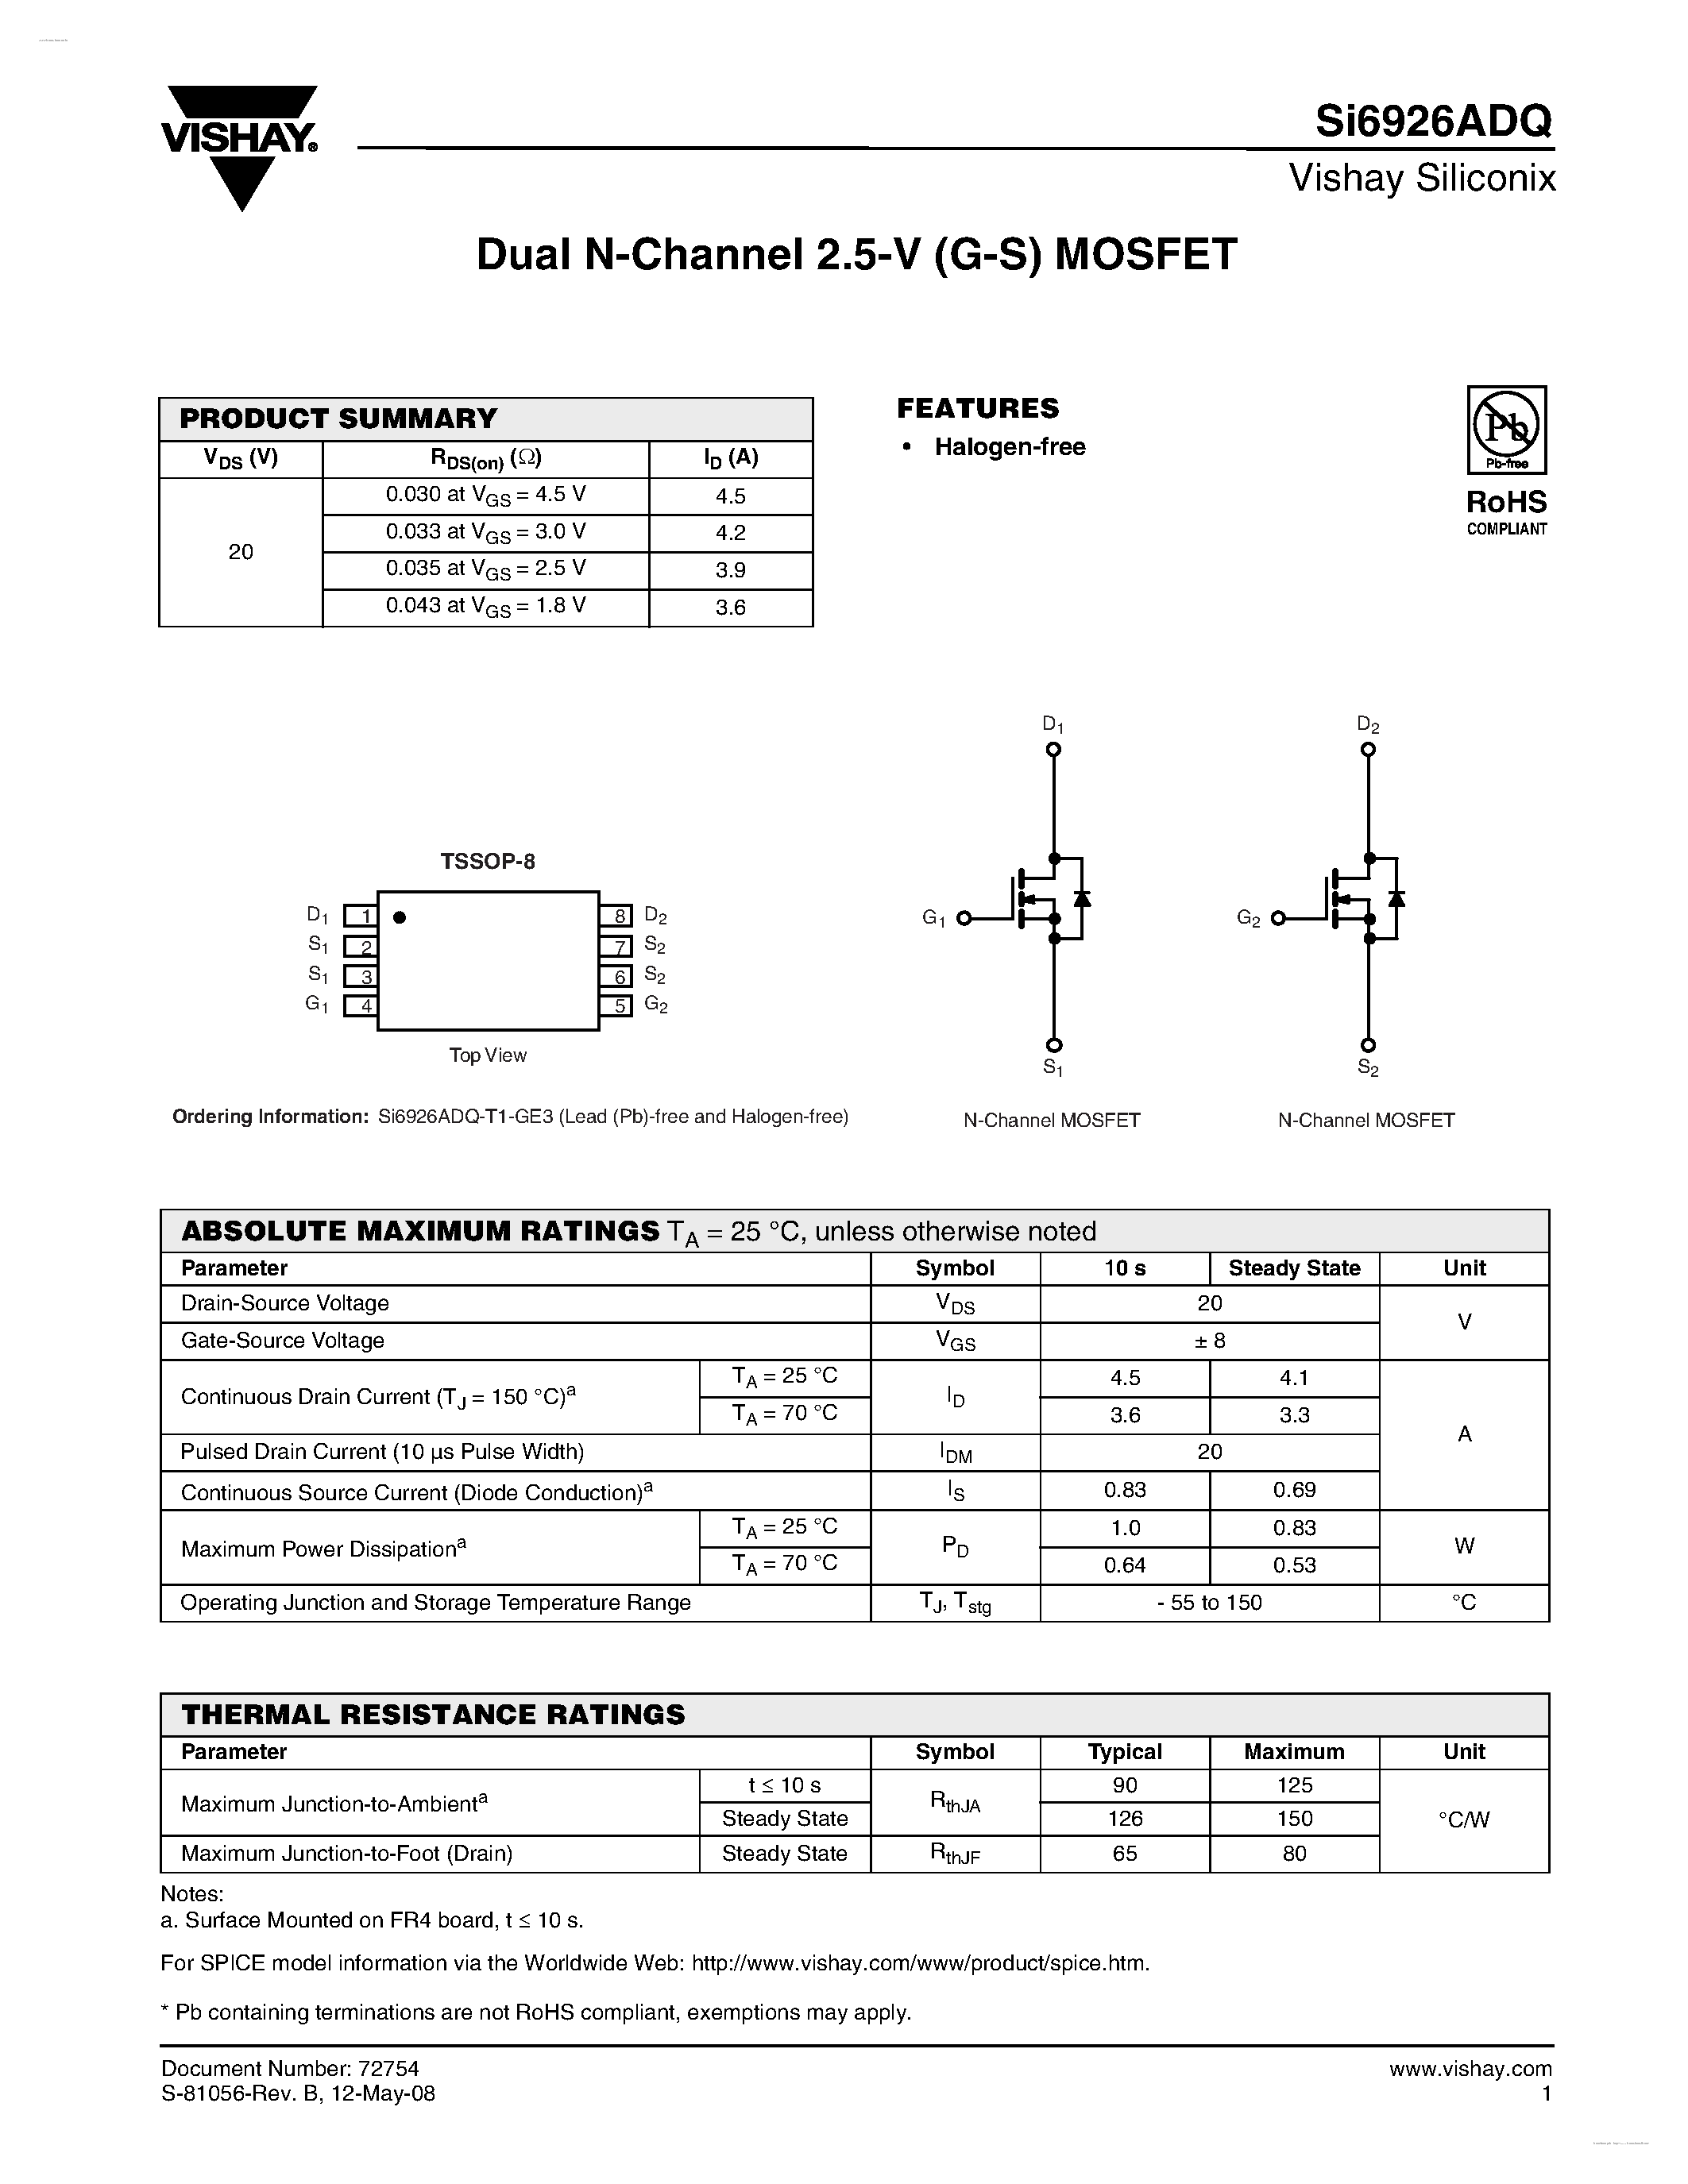 Datasheet SI6926ADQ - Dual N-Channel 2.5-V (G-S) MOSFET page 1